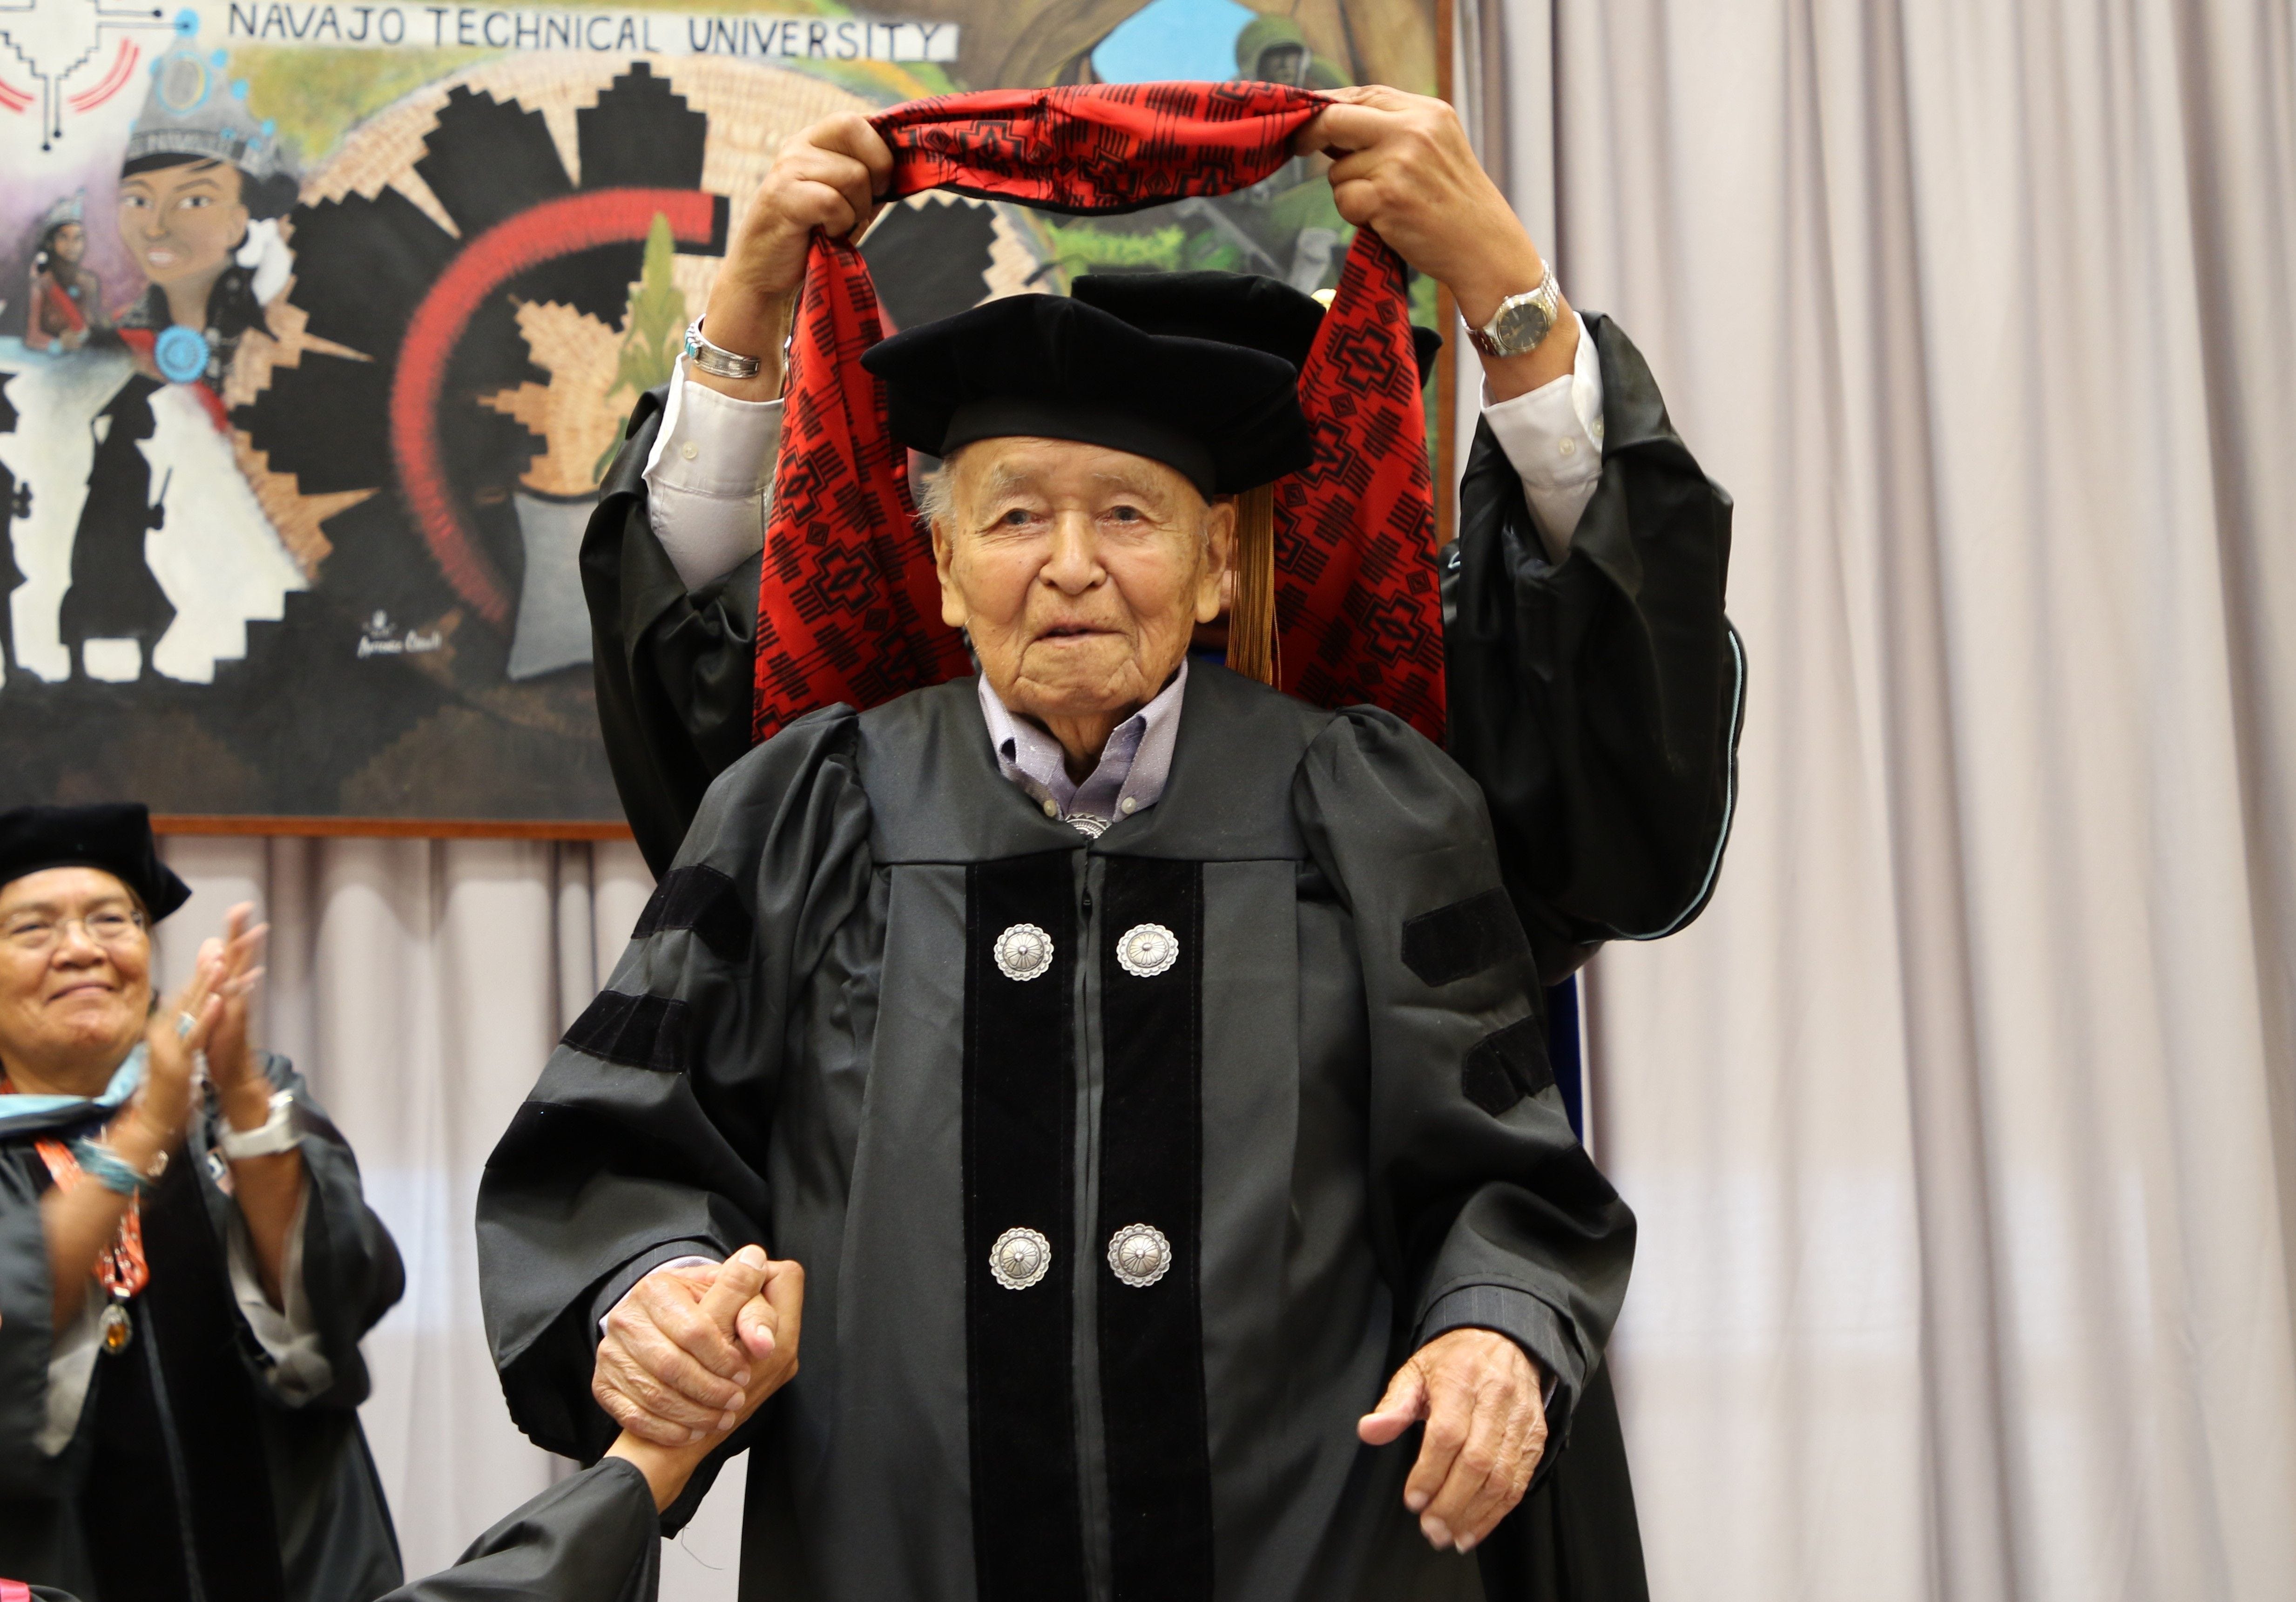 State Sen. John Pinto was named the first recipient of an honorary doctoral degree from Navajo Technical University on May 17, 2019, in Crownpoint.